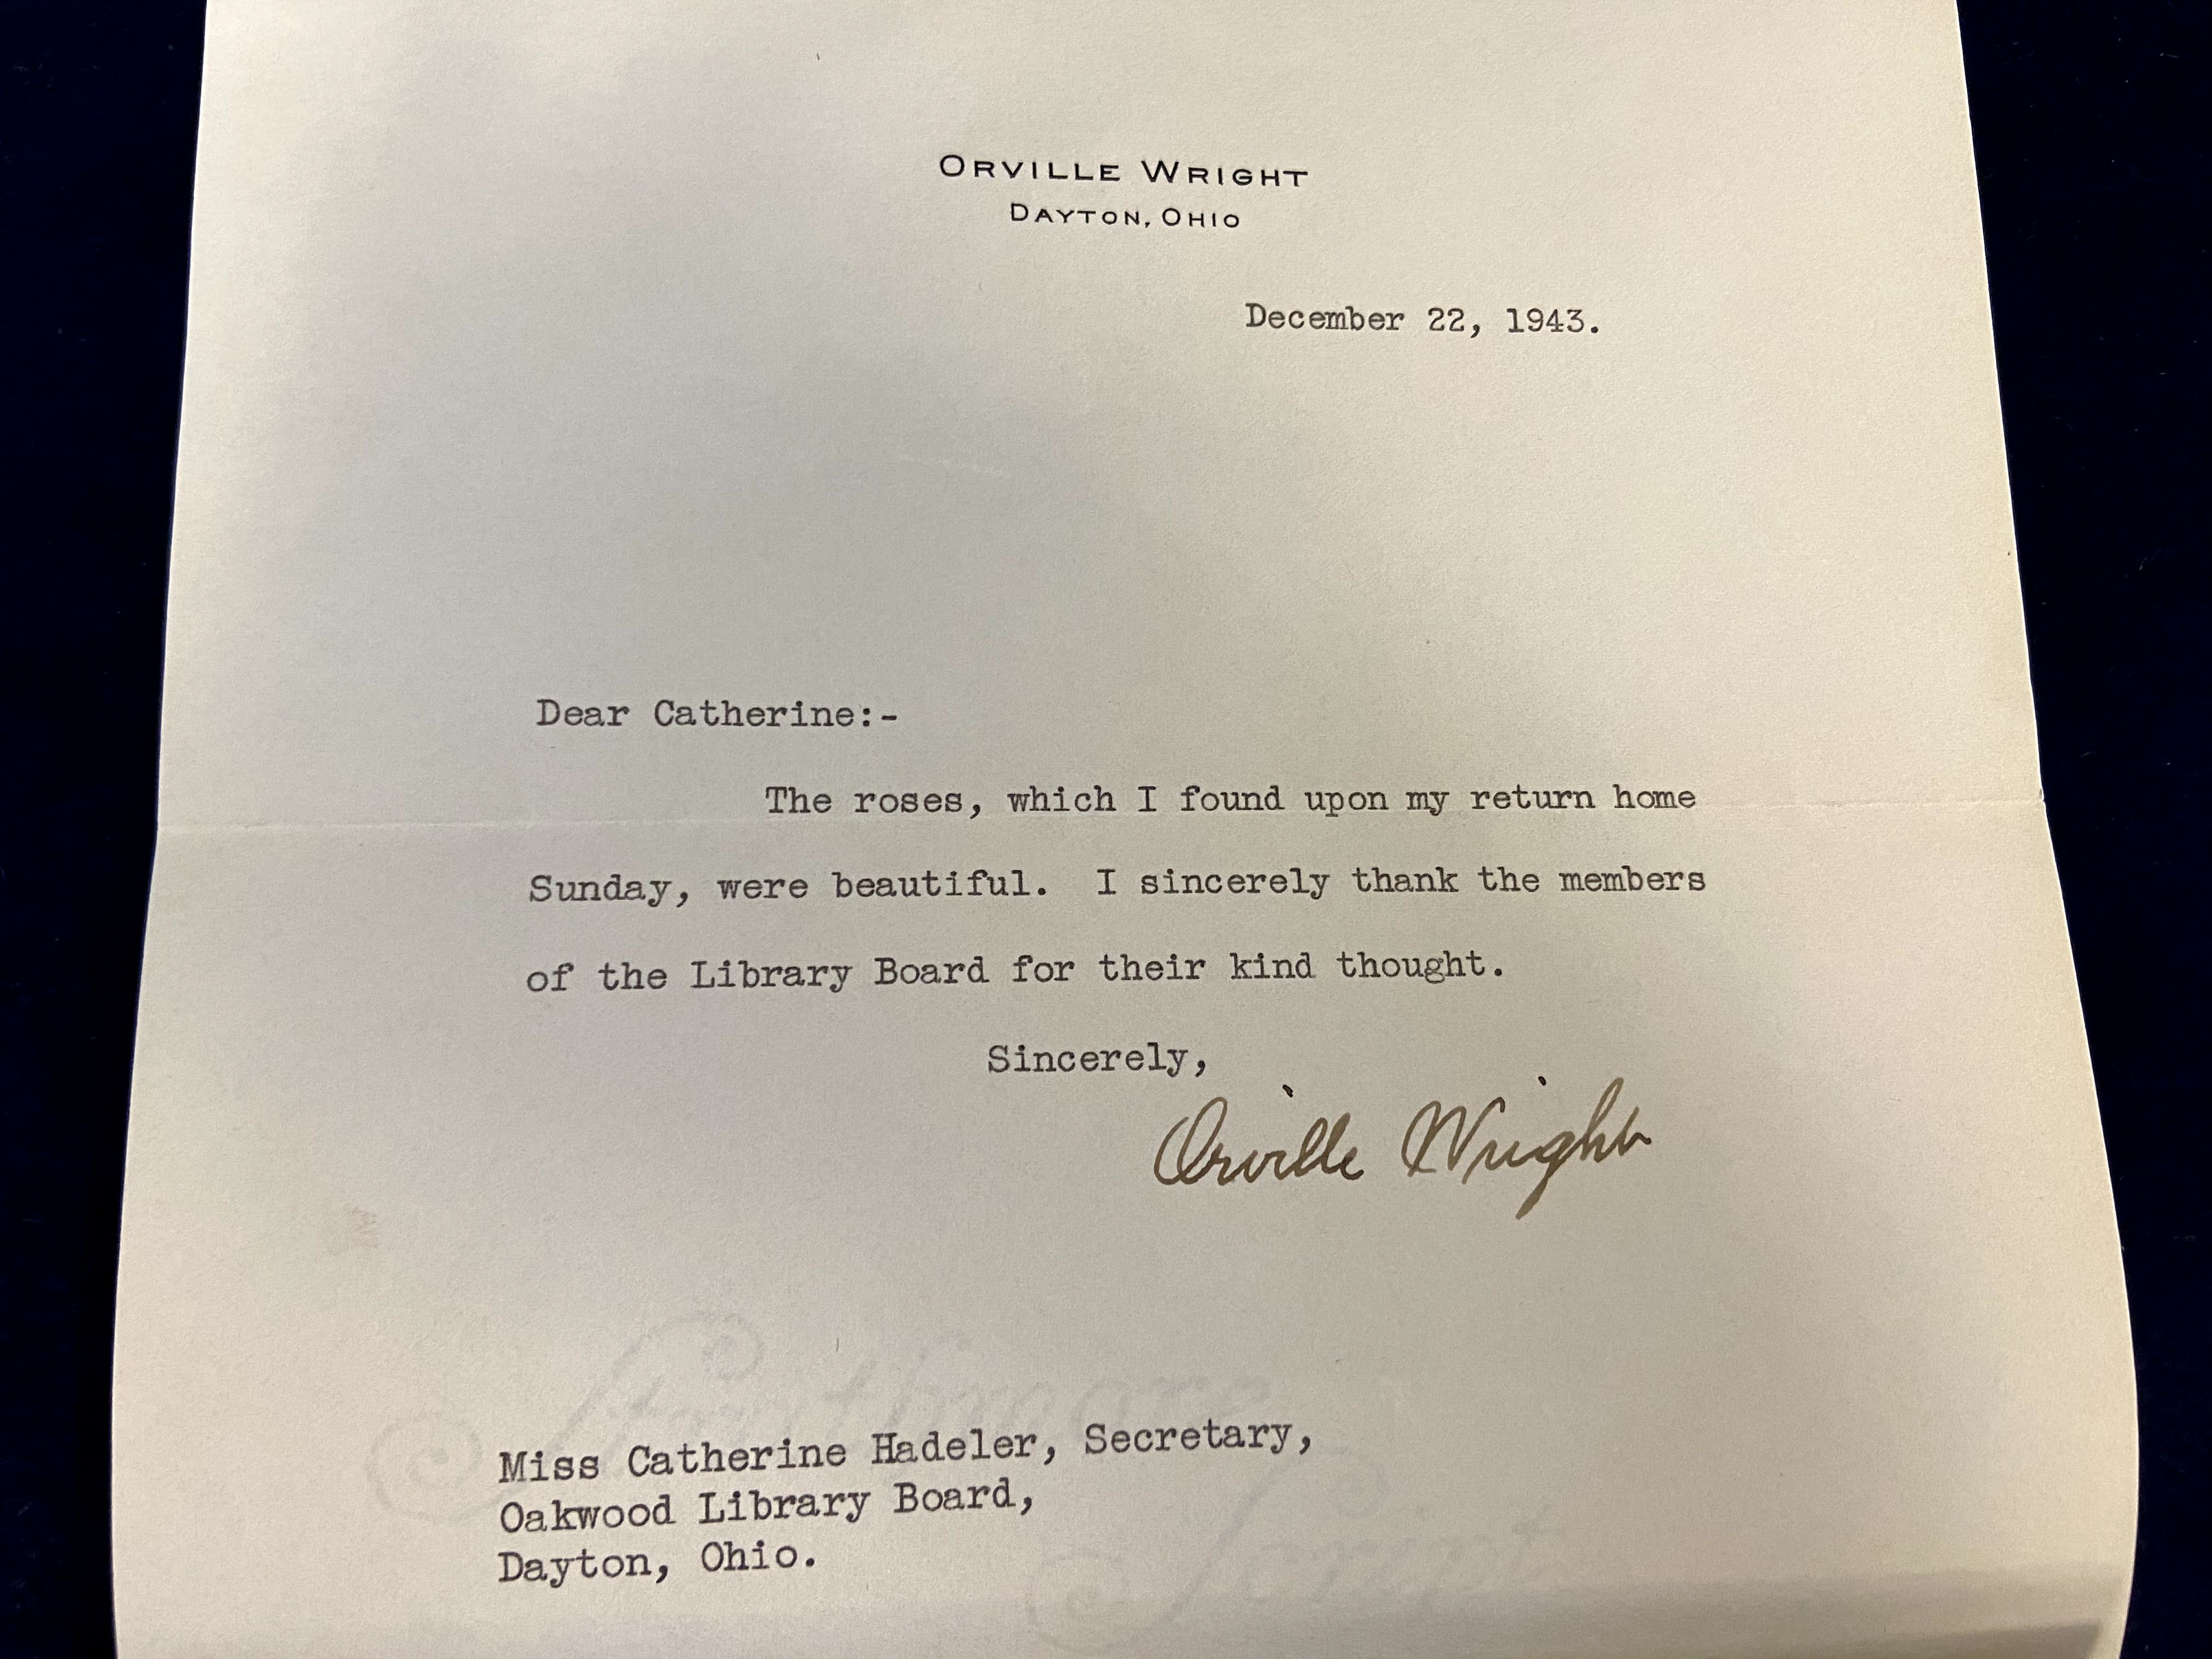 Wright Letter 